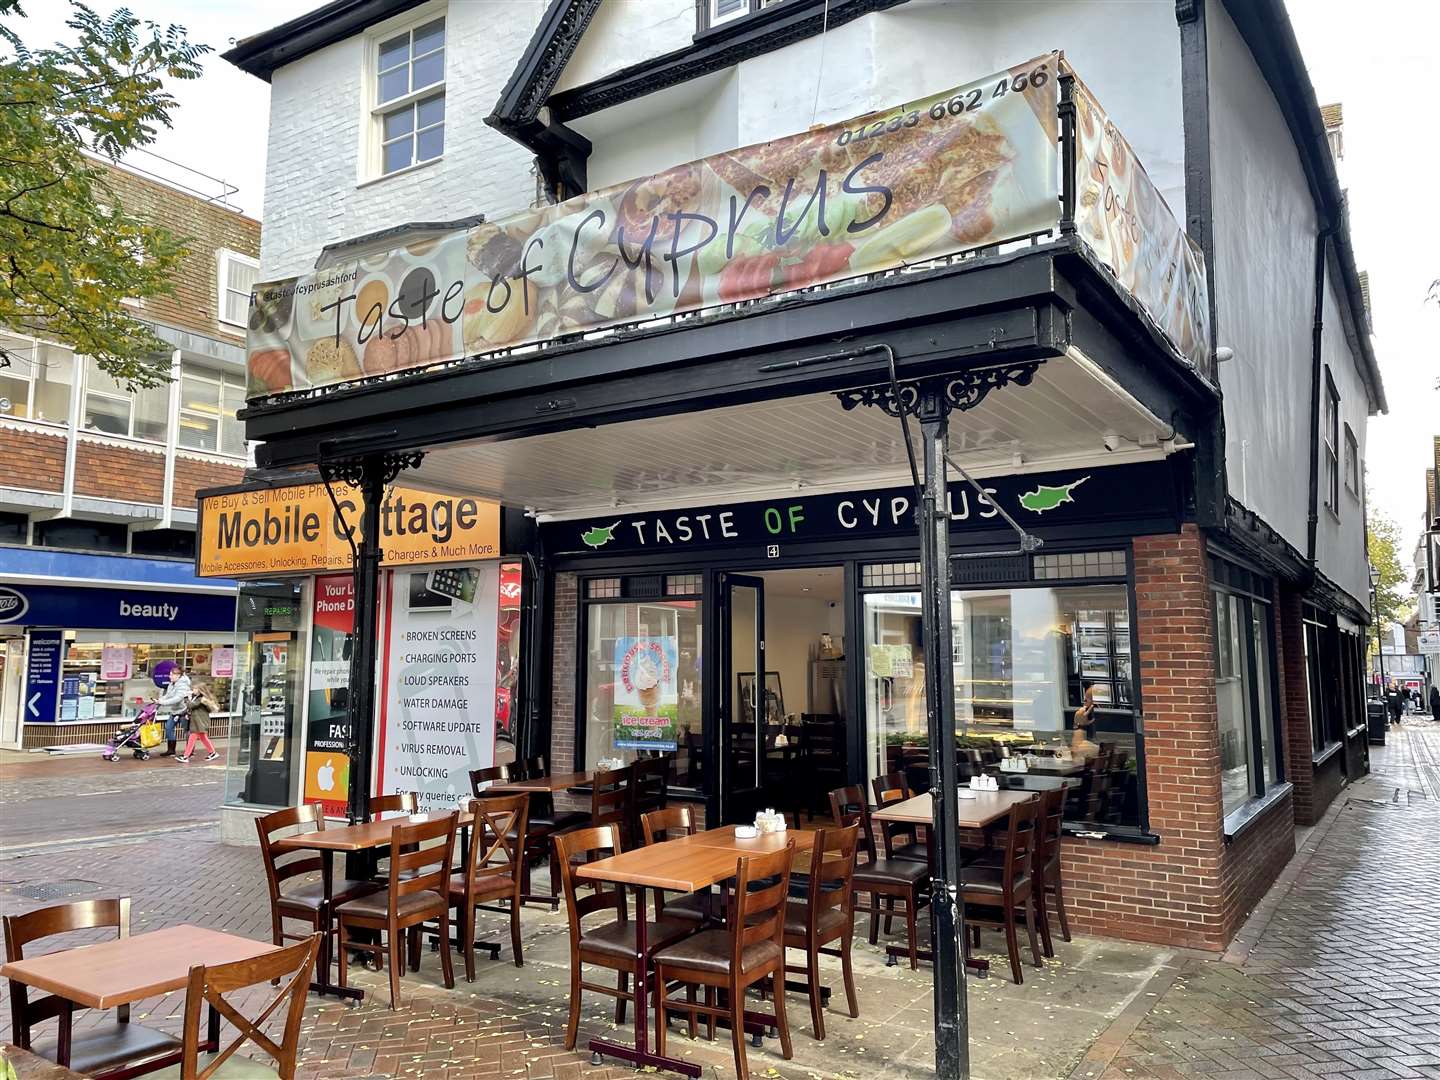 A Taste of Cyprus is located in Ashford's Middle Street